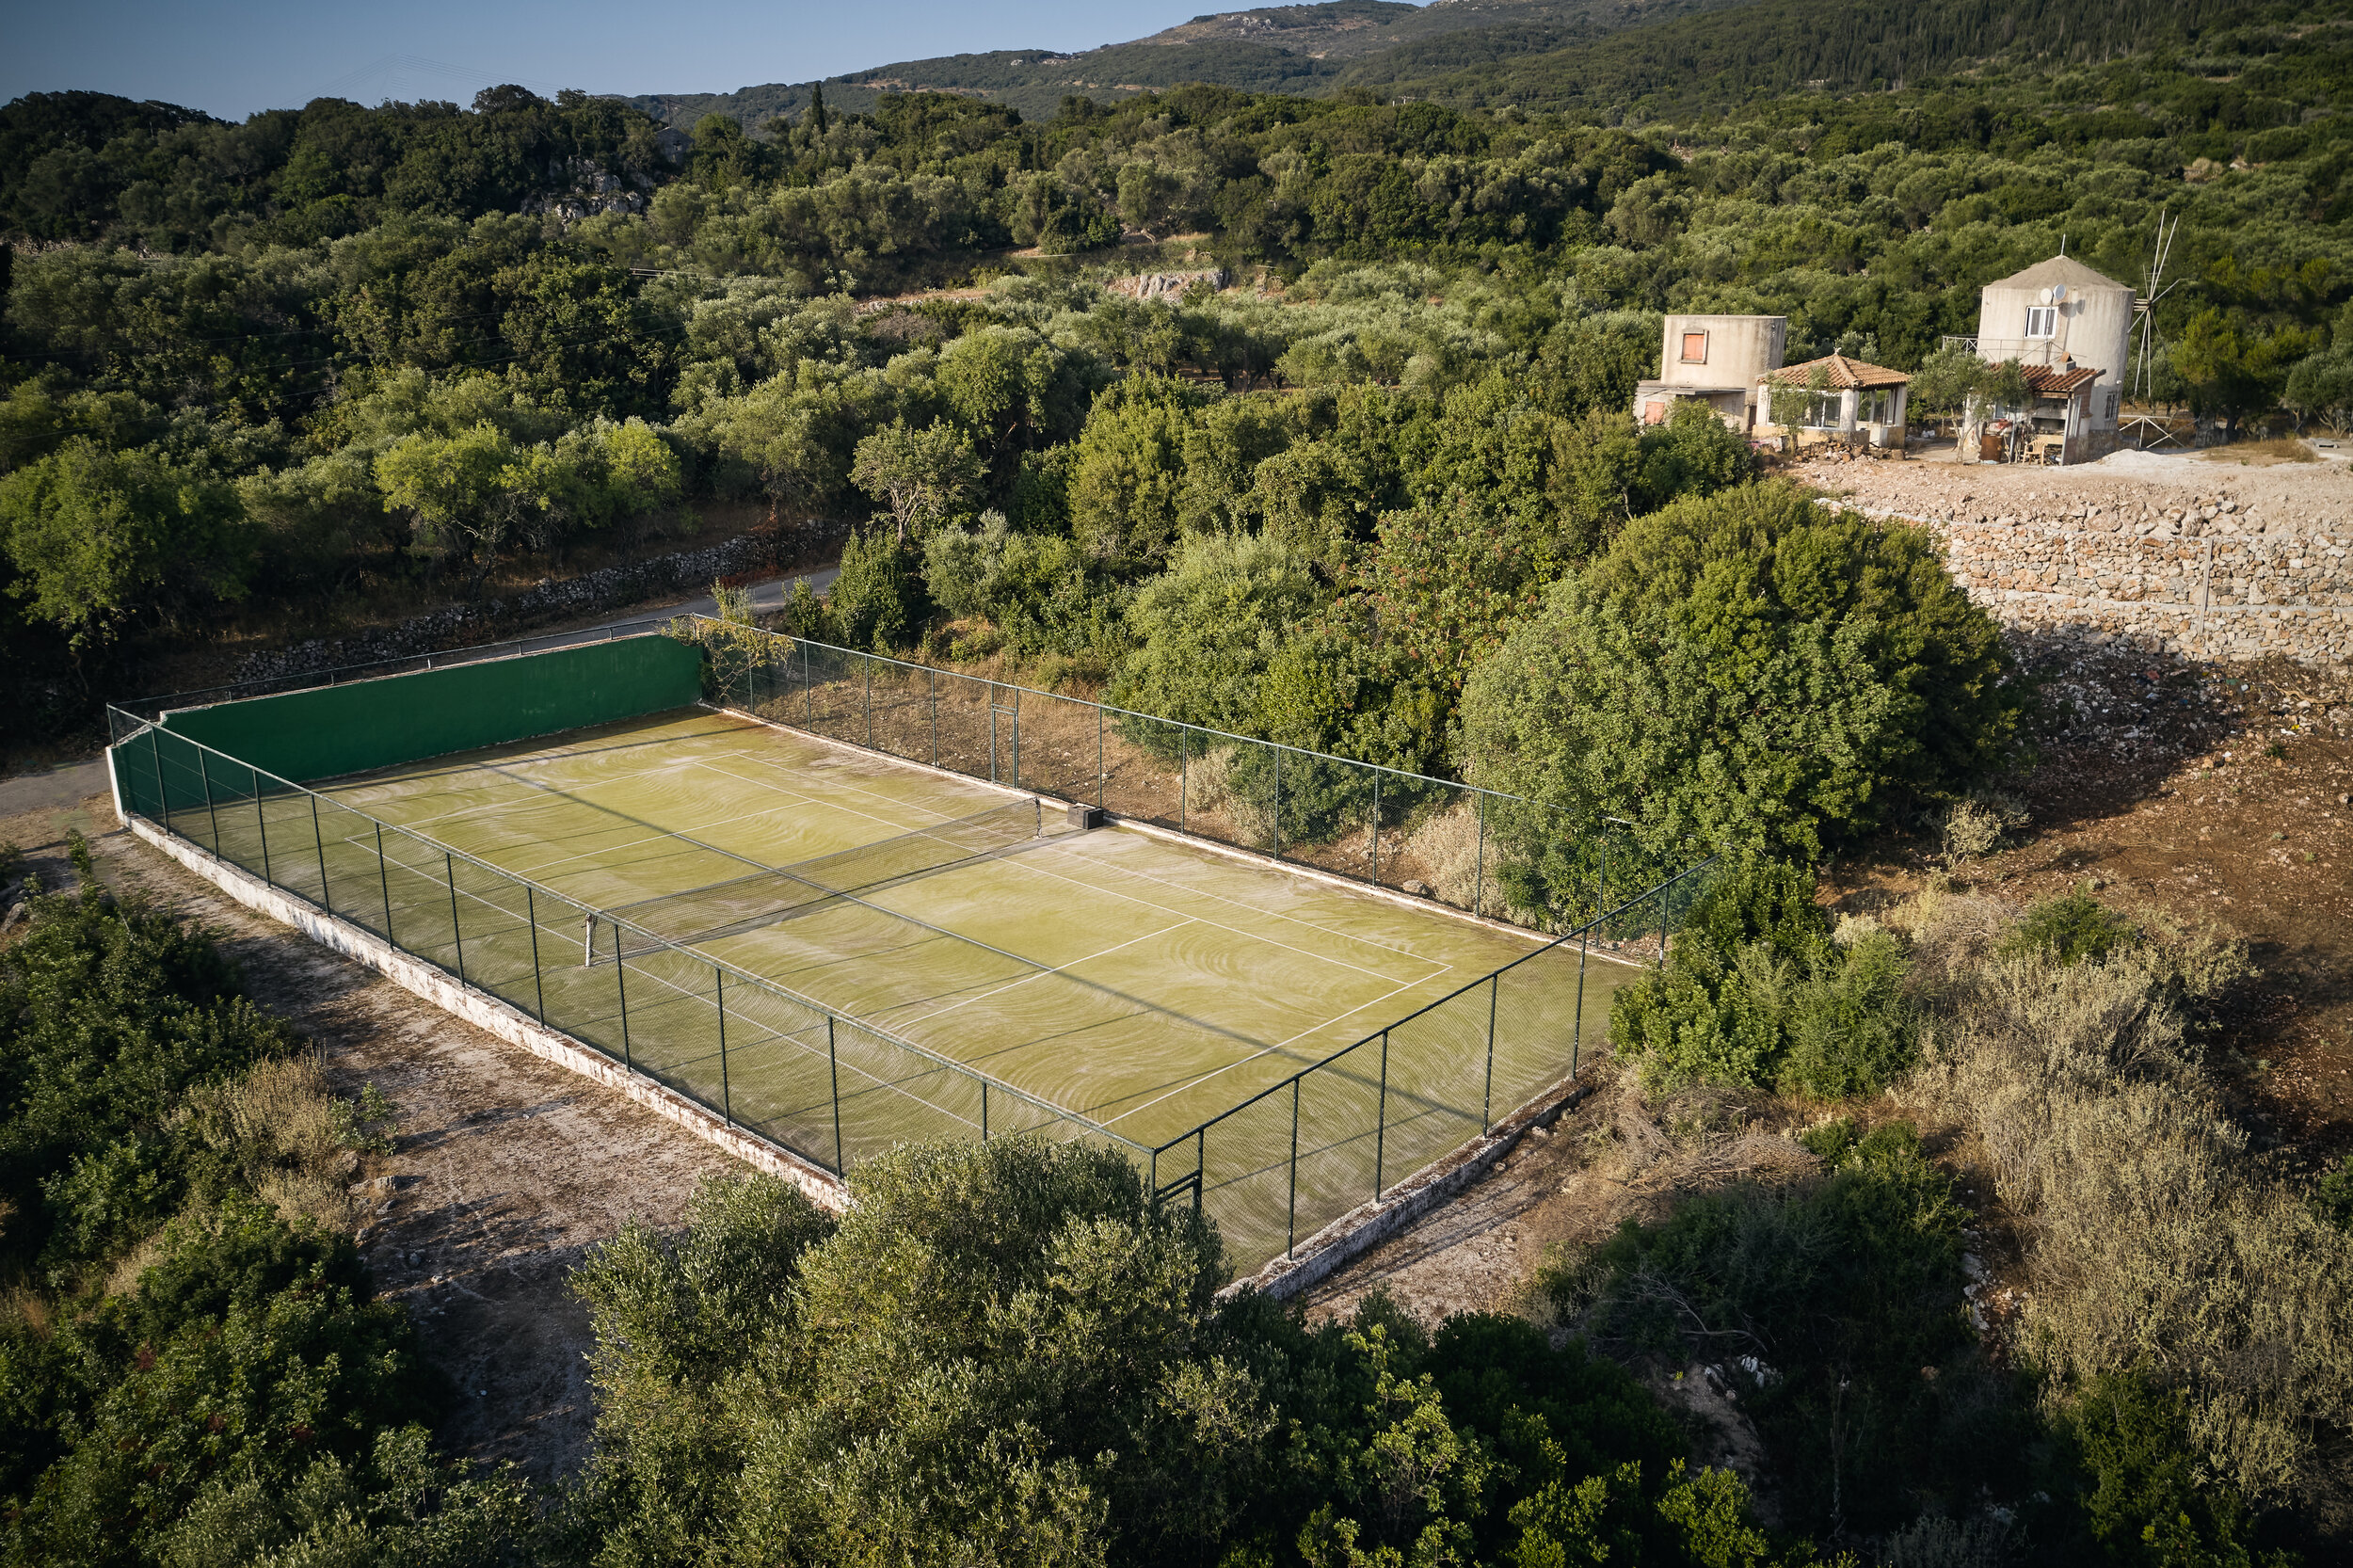 Private tennis court amongst ancient olives